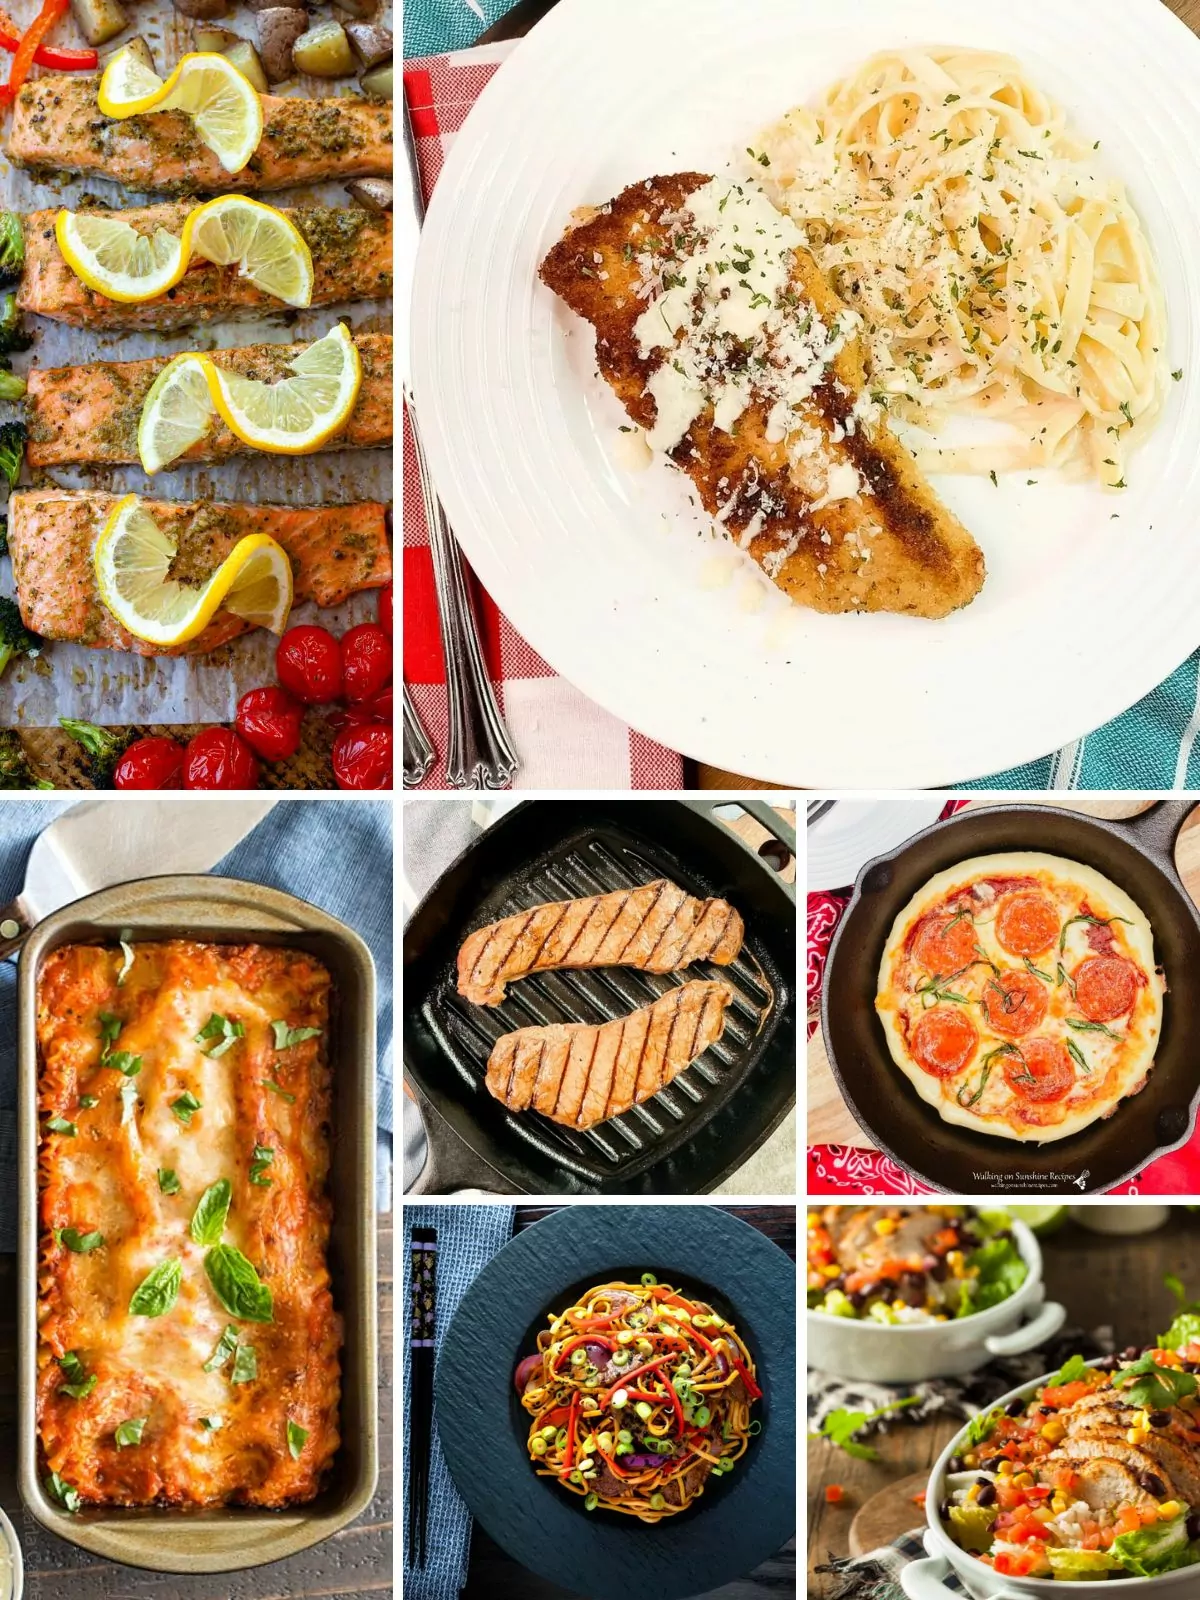 7 delicious dinner recipes designed for two servings, featuring a variety of cuisines.